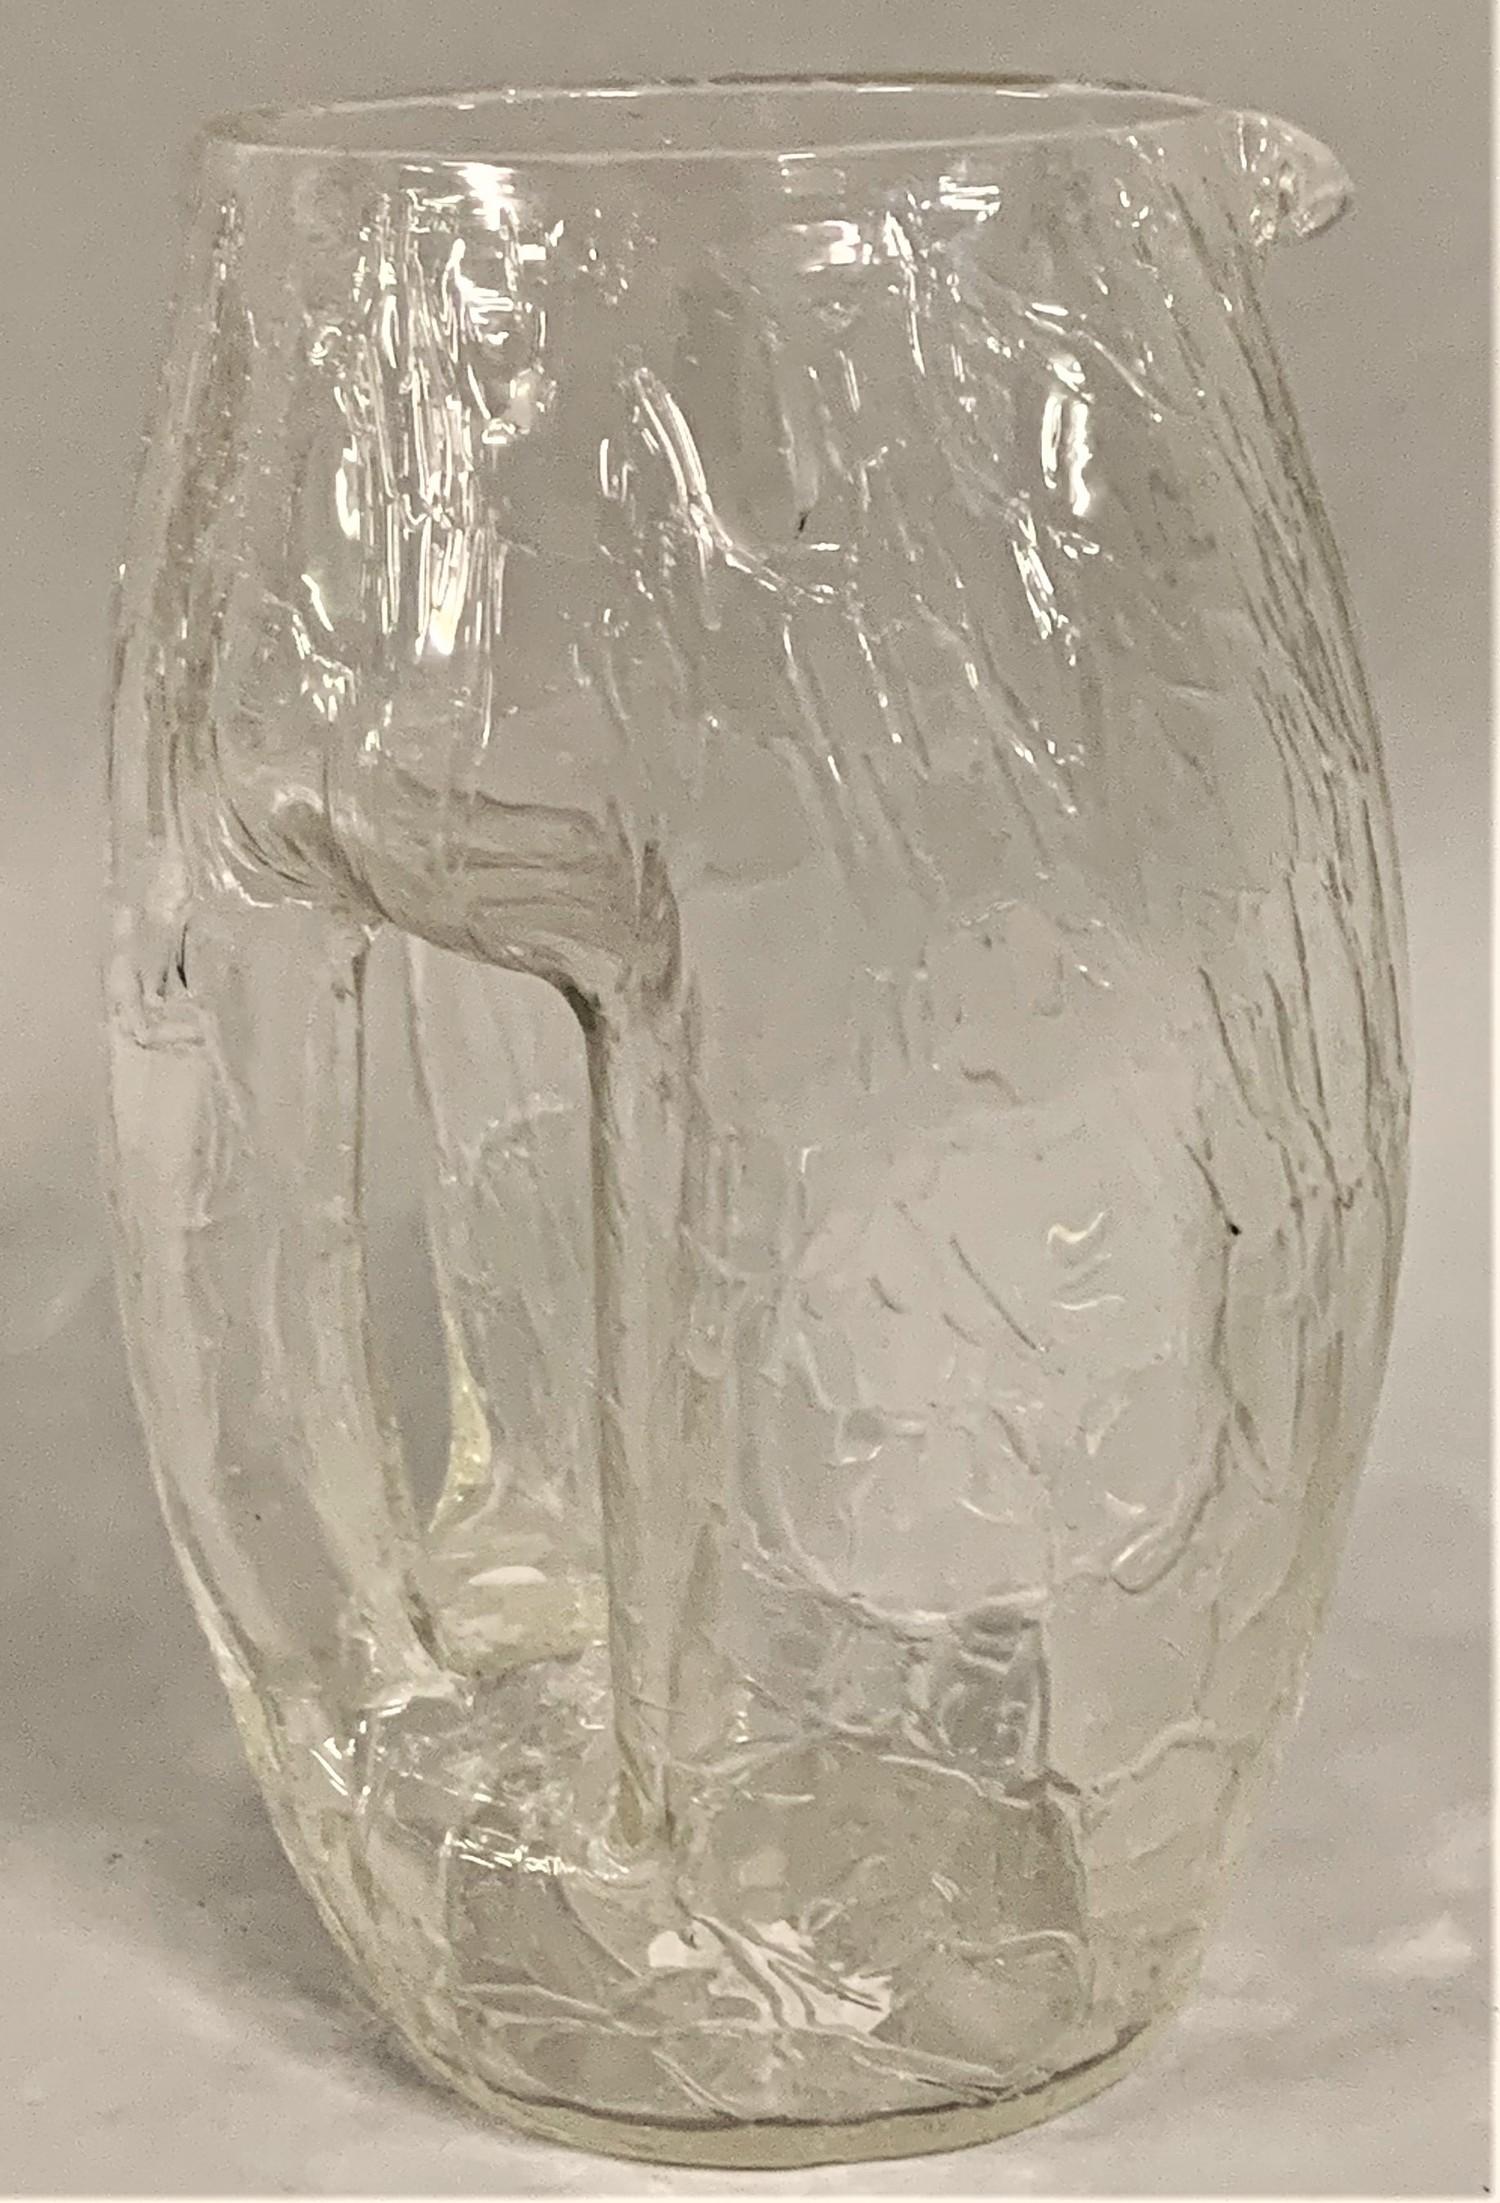 Attributed to Koloman Moser for Loetz: a clear crackle glass jug of barrel form, with integral